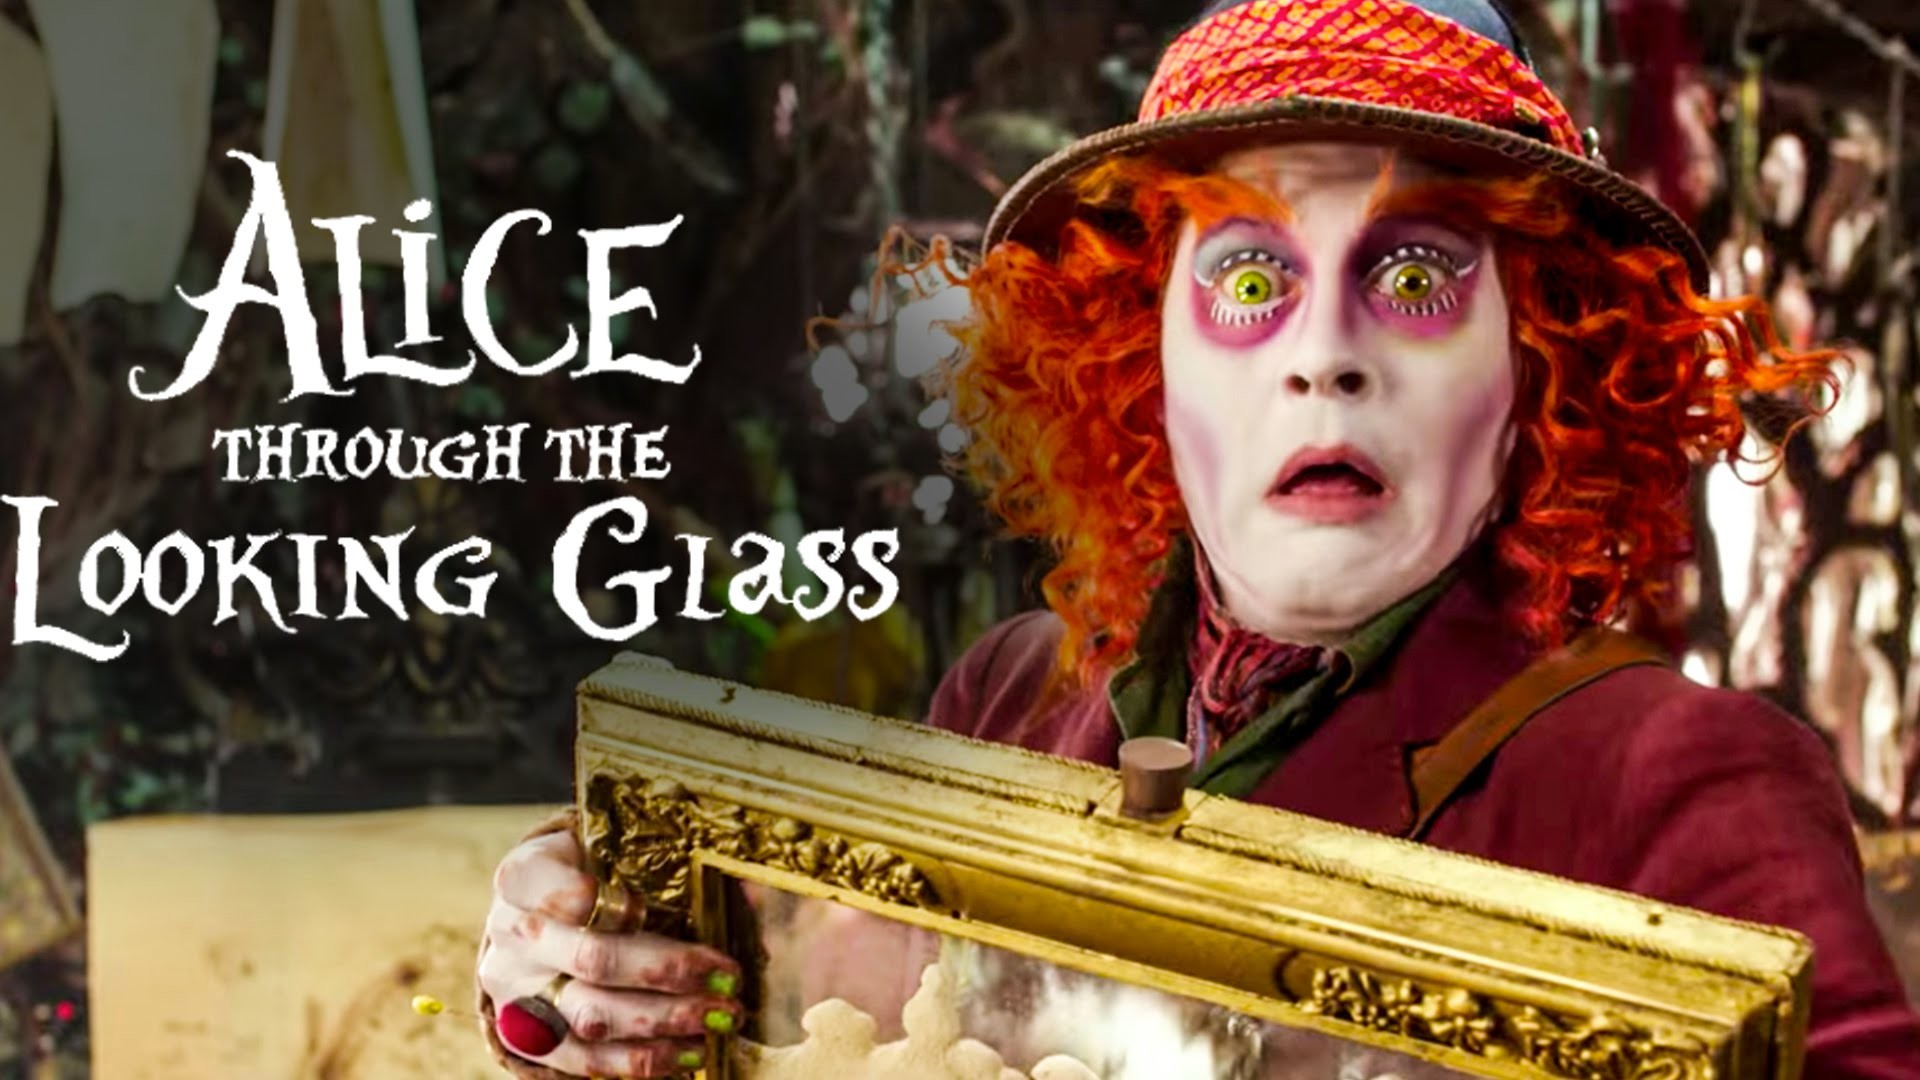 1920x1080 Alice Through the Looking Glass Official Trailer #1 (2016) Johnny Depp  Disney Fantasy Movie HD - YouTube